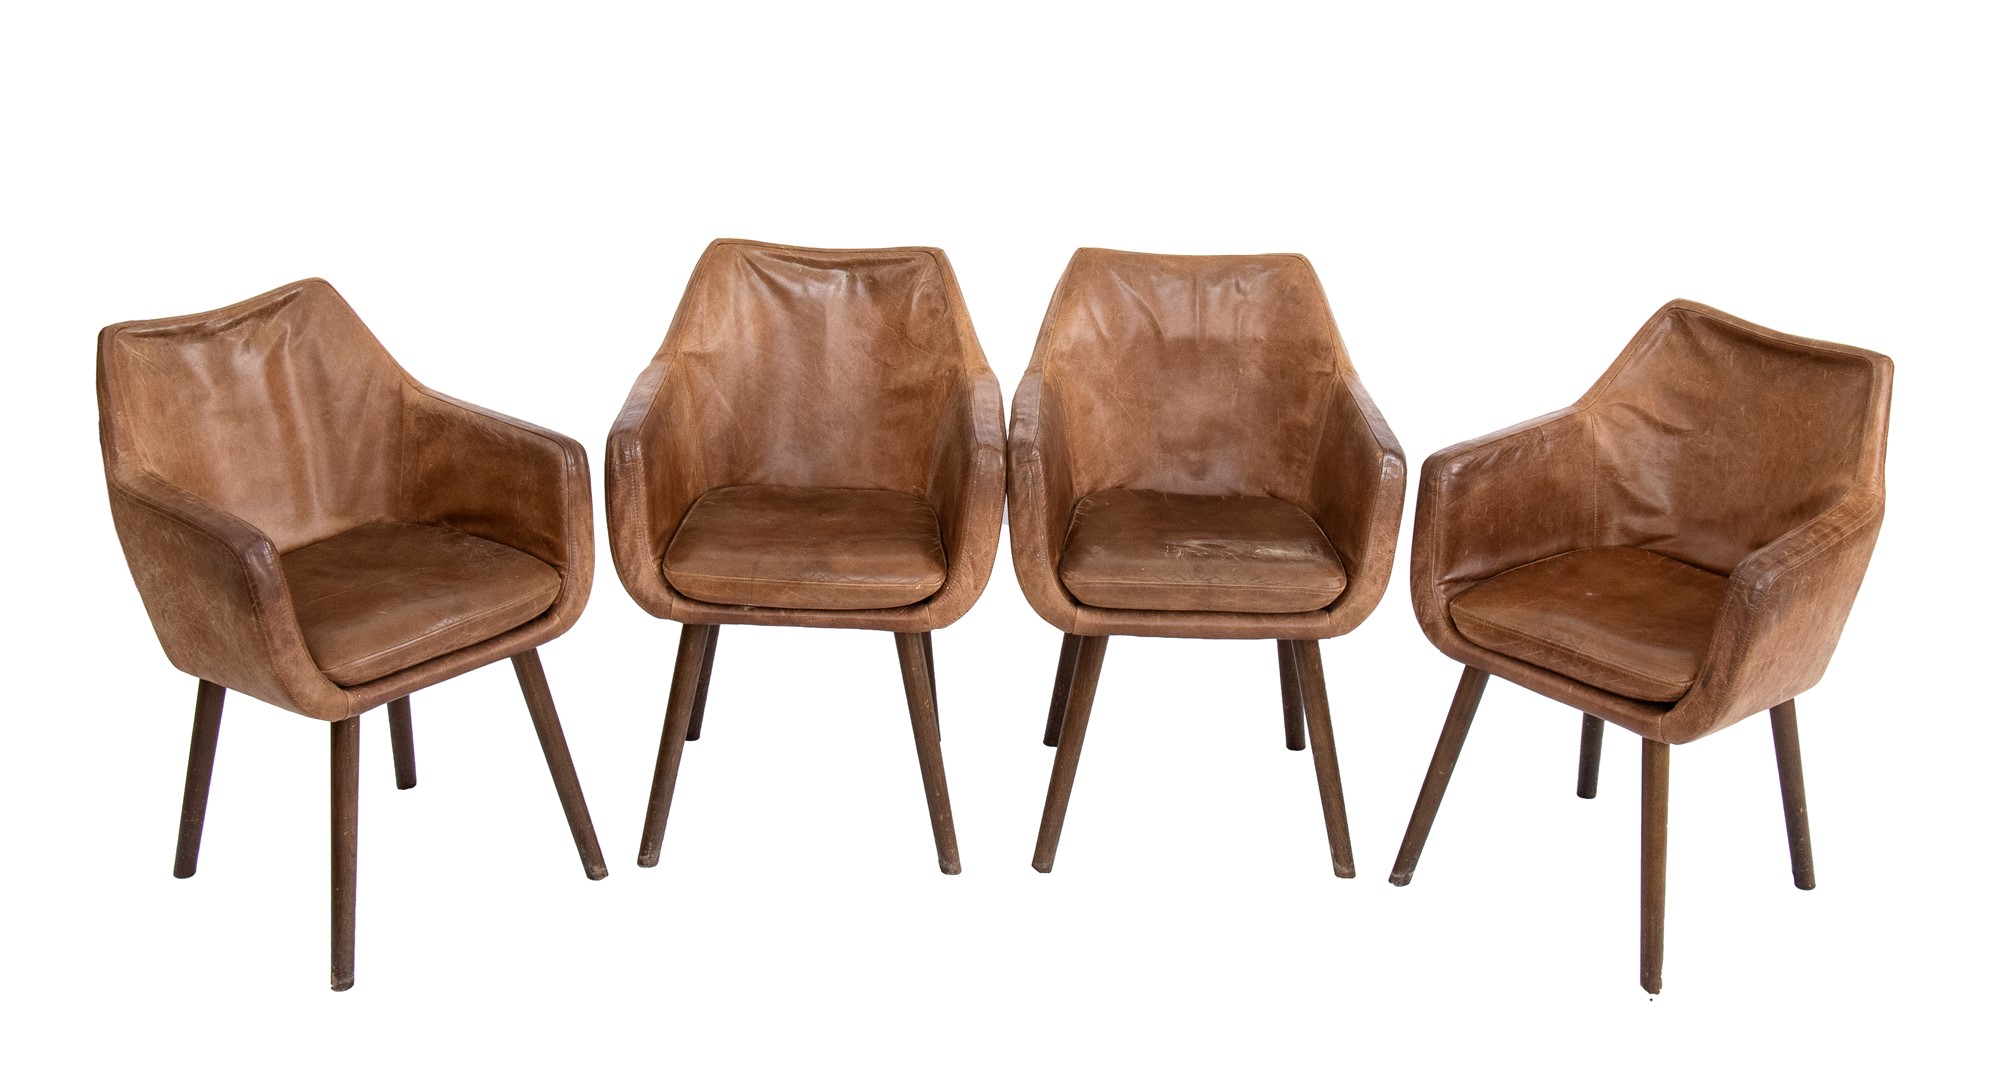 4 leather chairs. 20th century English manufacture - Image 5 of 19